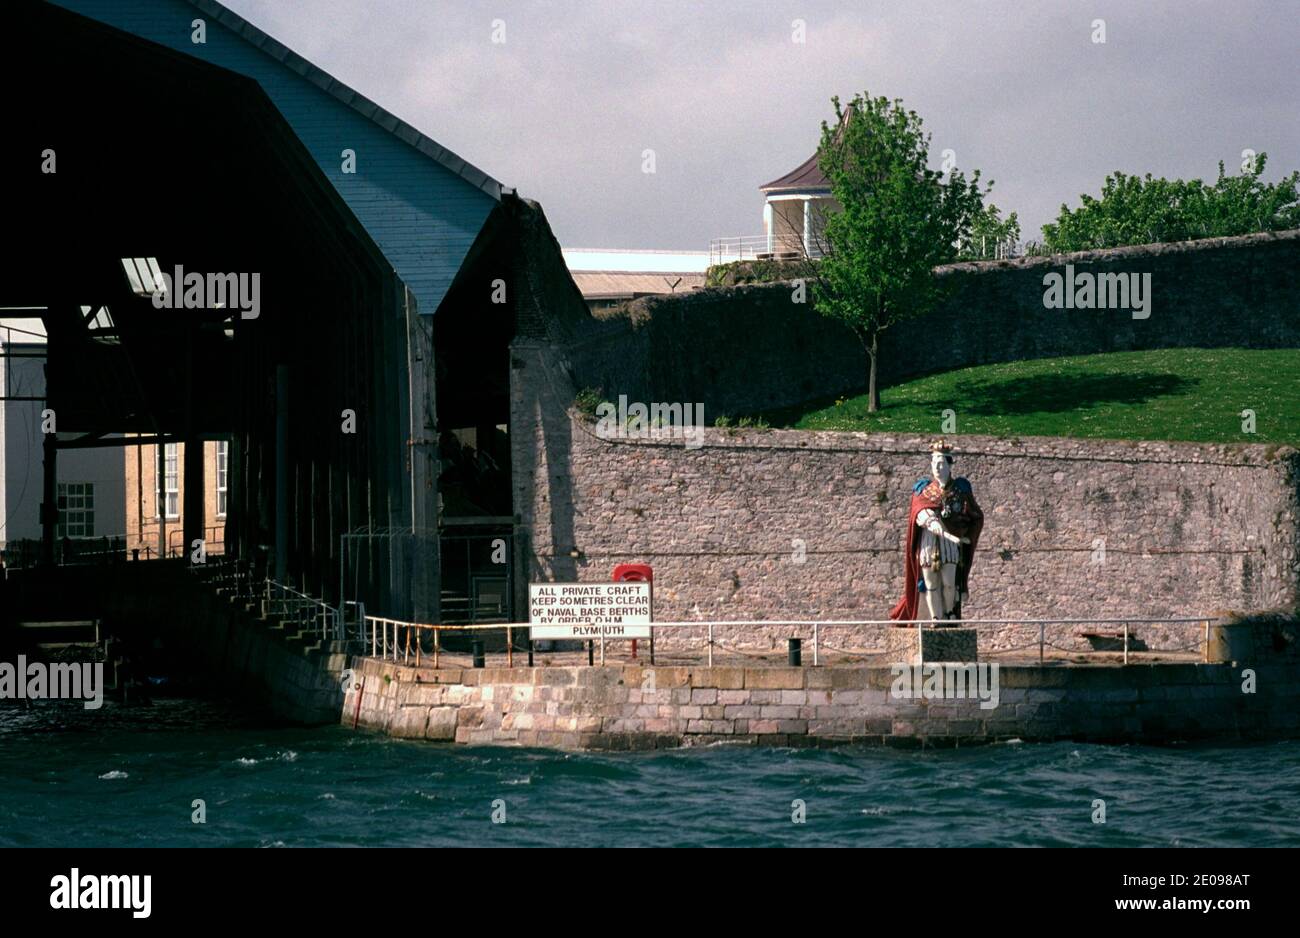 AJAXNETPHOTO. DEVONPORT, PLYMOUTH. - KING BILLY - FIGUREHEAD OF KING WILLIAM IV WHICH ORIGINALLY ADORNED THE BOWS OF THE 120 GUN SHIP ROYAL WILLIAM (KING BILLY) STANDS TO THE RIGHT OF THE OLD NR. 1 COVERED BOAT SLIP.  PHOTO:JONATHAN EASTLAND/AJAX REF:CD0055 5 Stock Photo